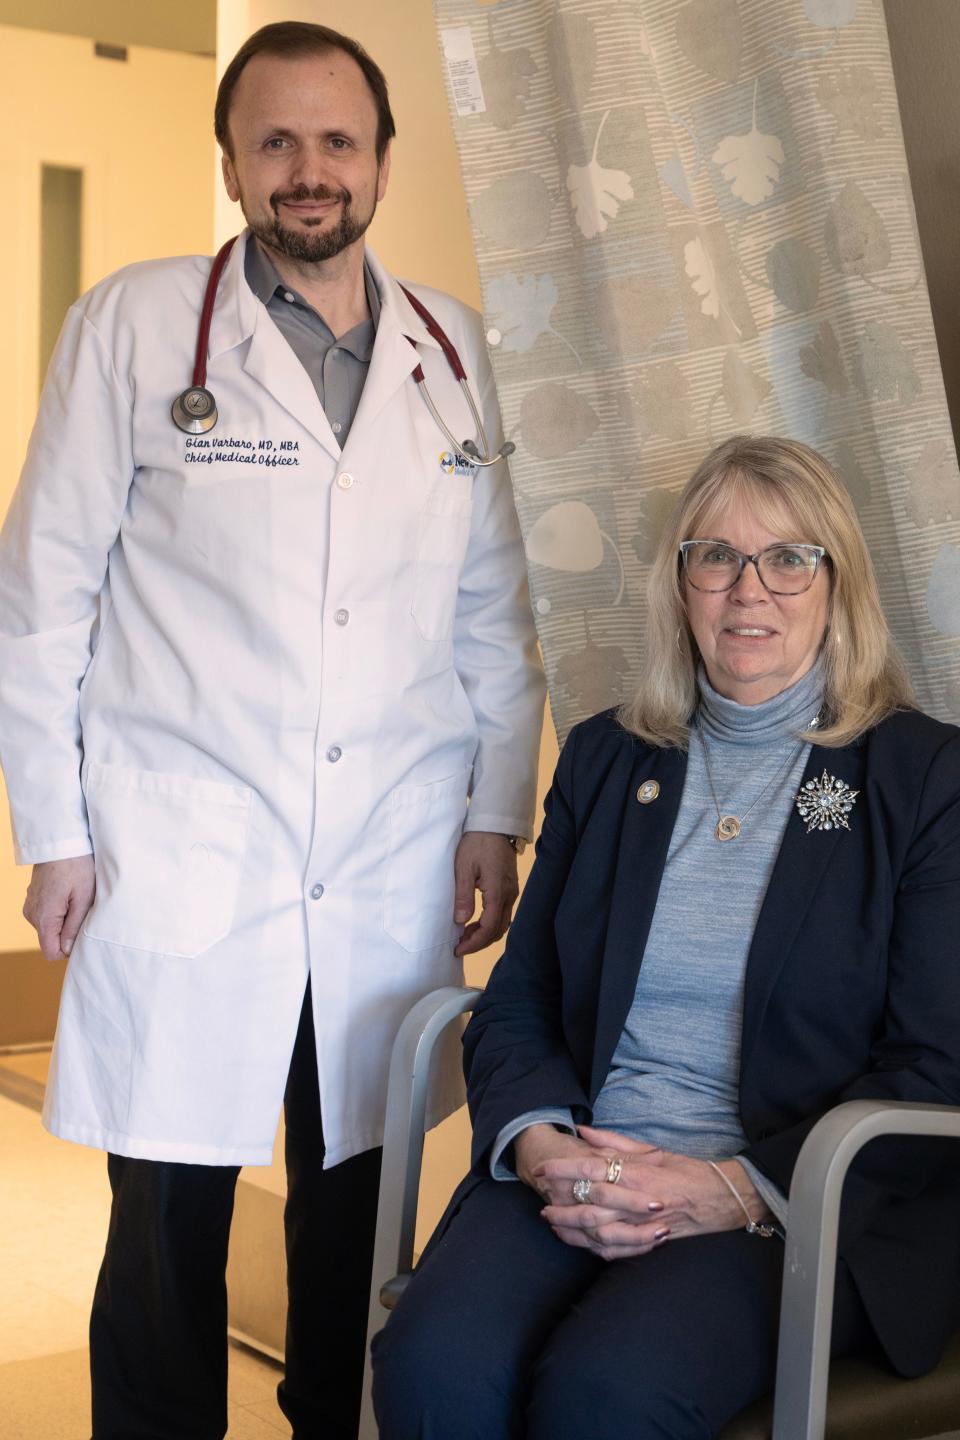 Barbara Piascik, an executive at Bergen New Bridge Medical Center, has long COVID. She has been advised by Dr. Gian Varbaro, at left, the hospital's chief medical officer.